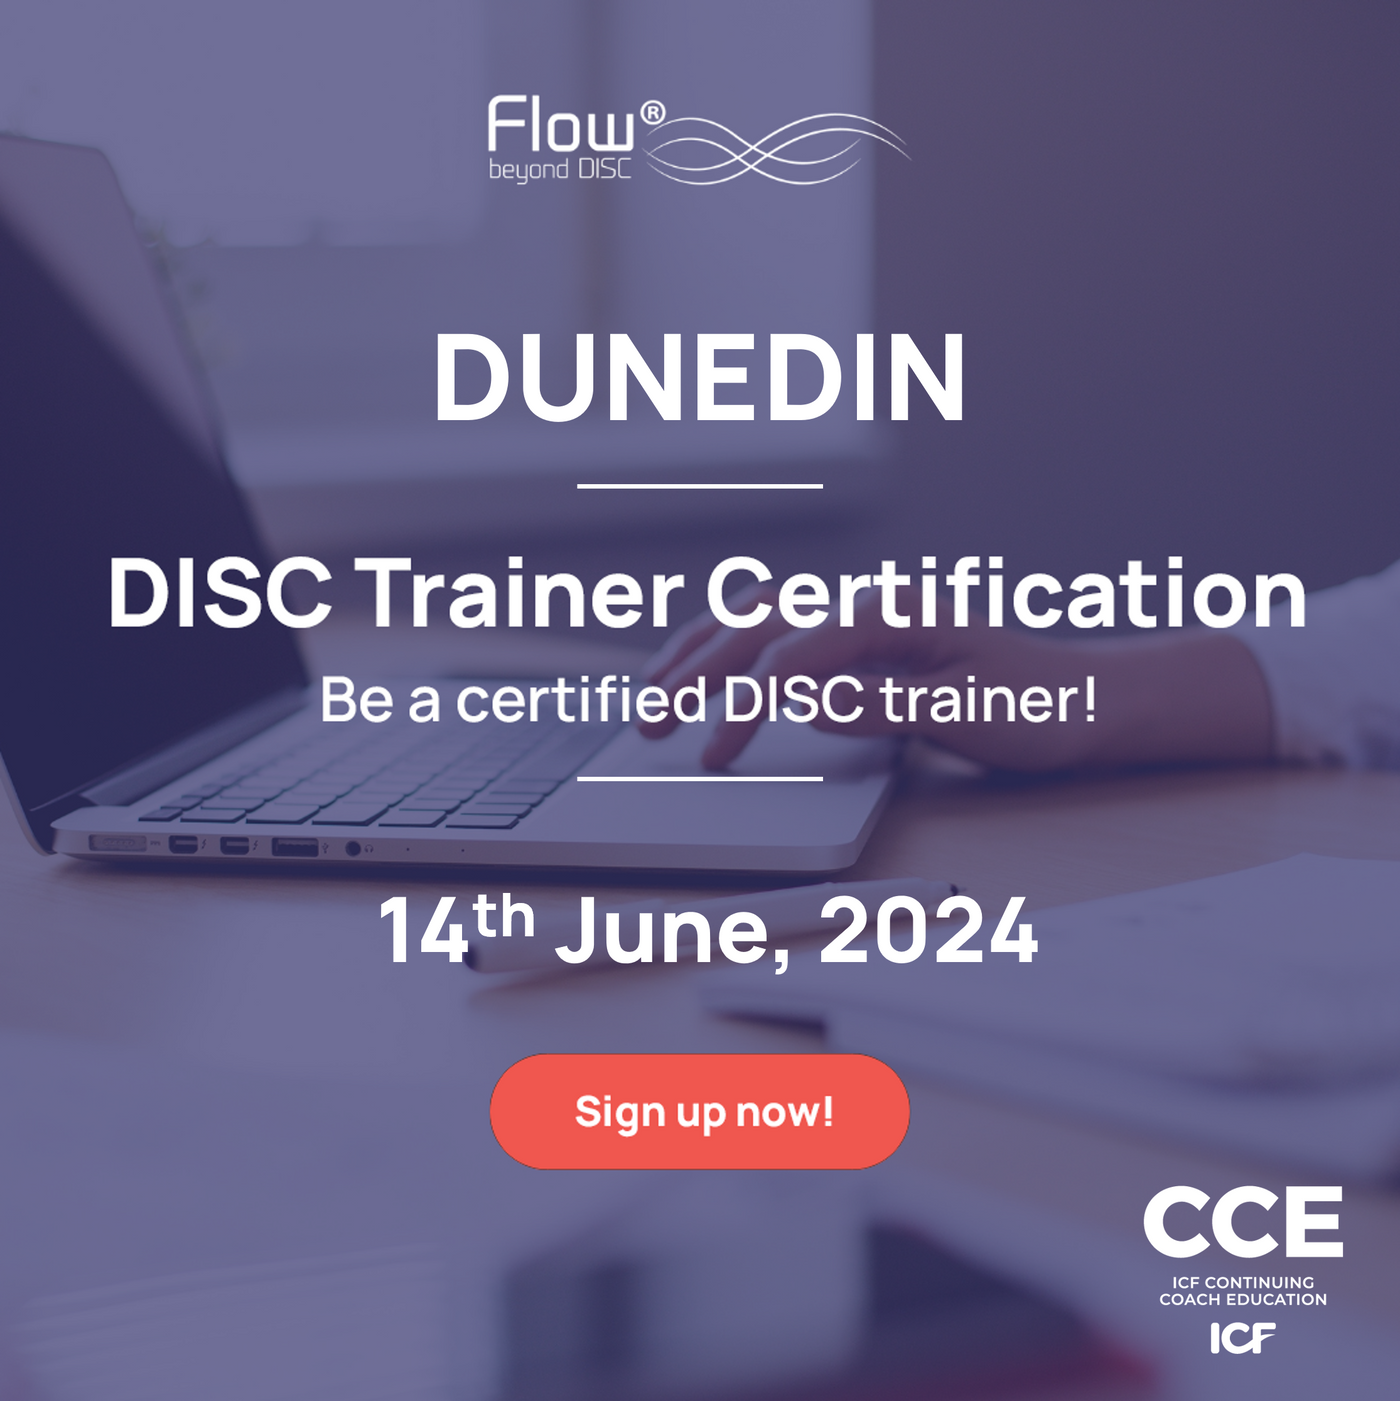 DUNEDIN Advanced Certification Course - receives ICF CCE points